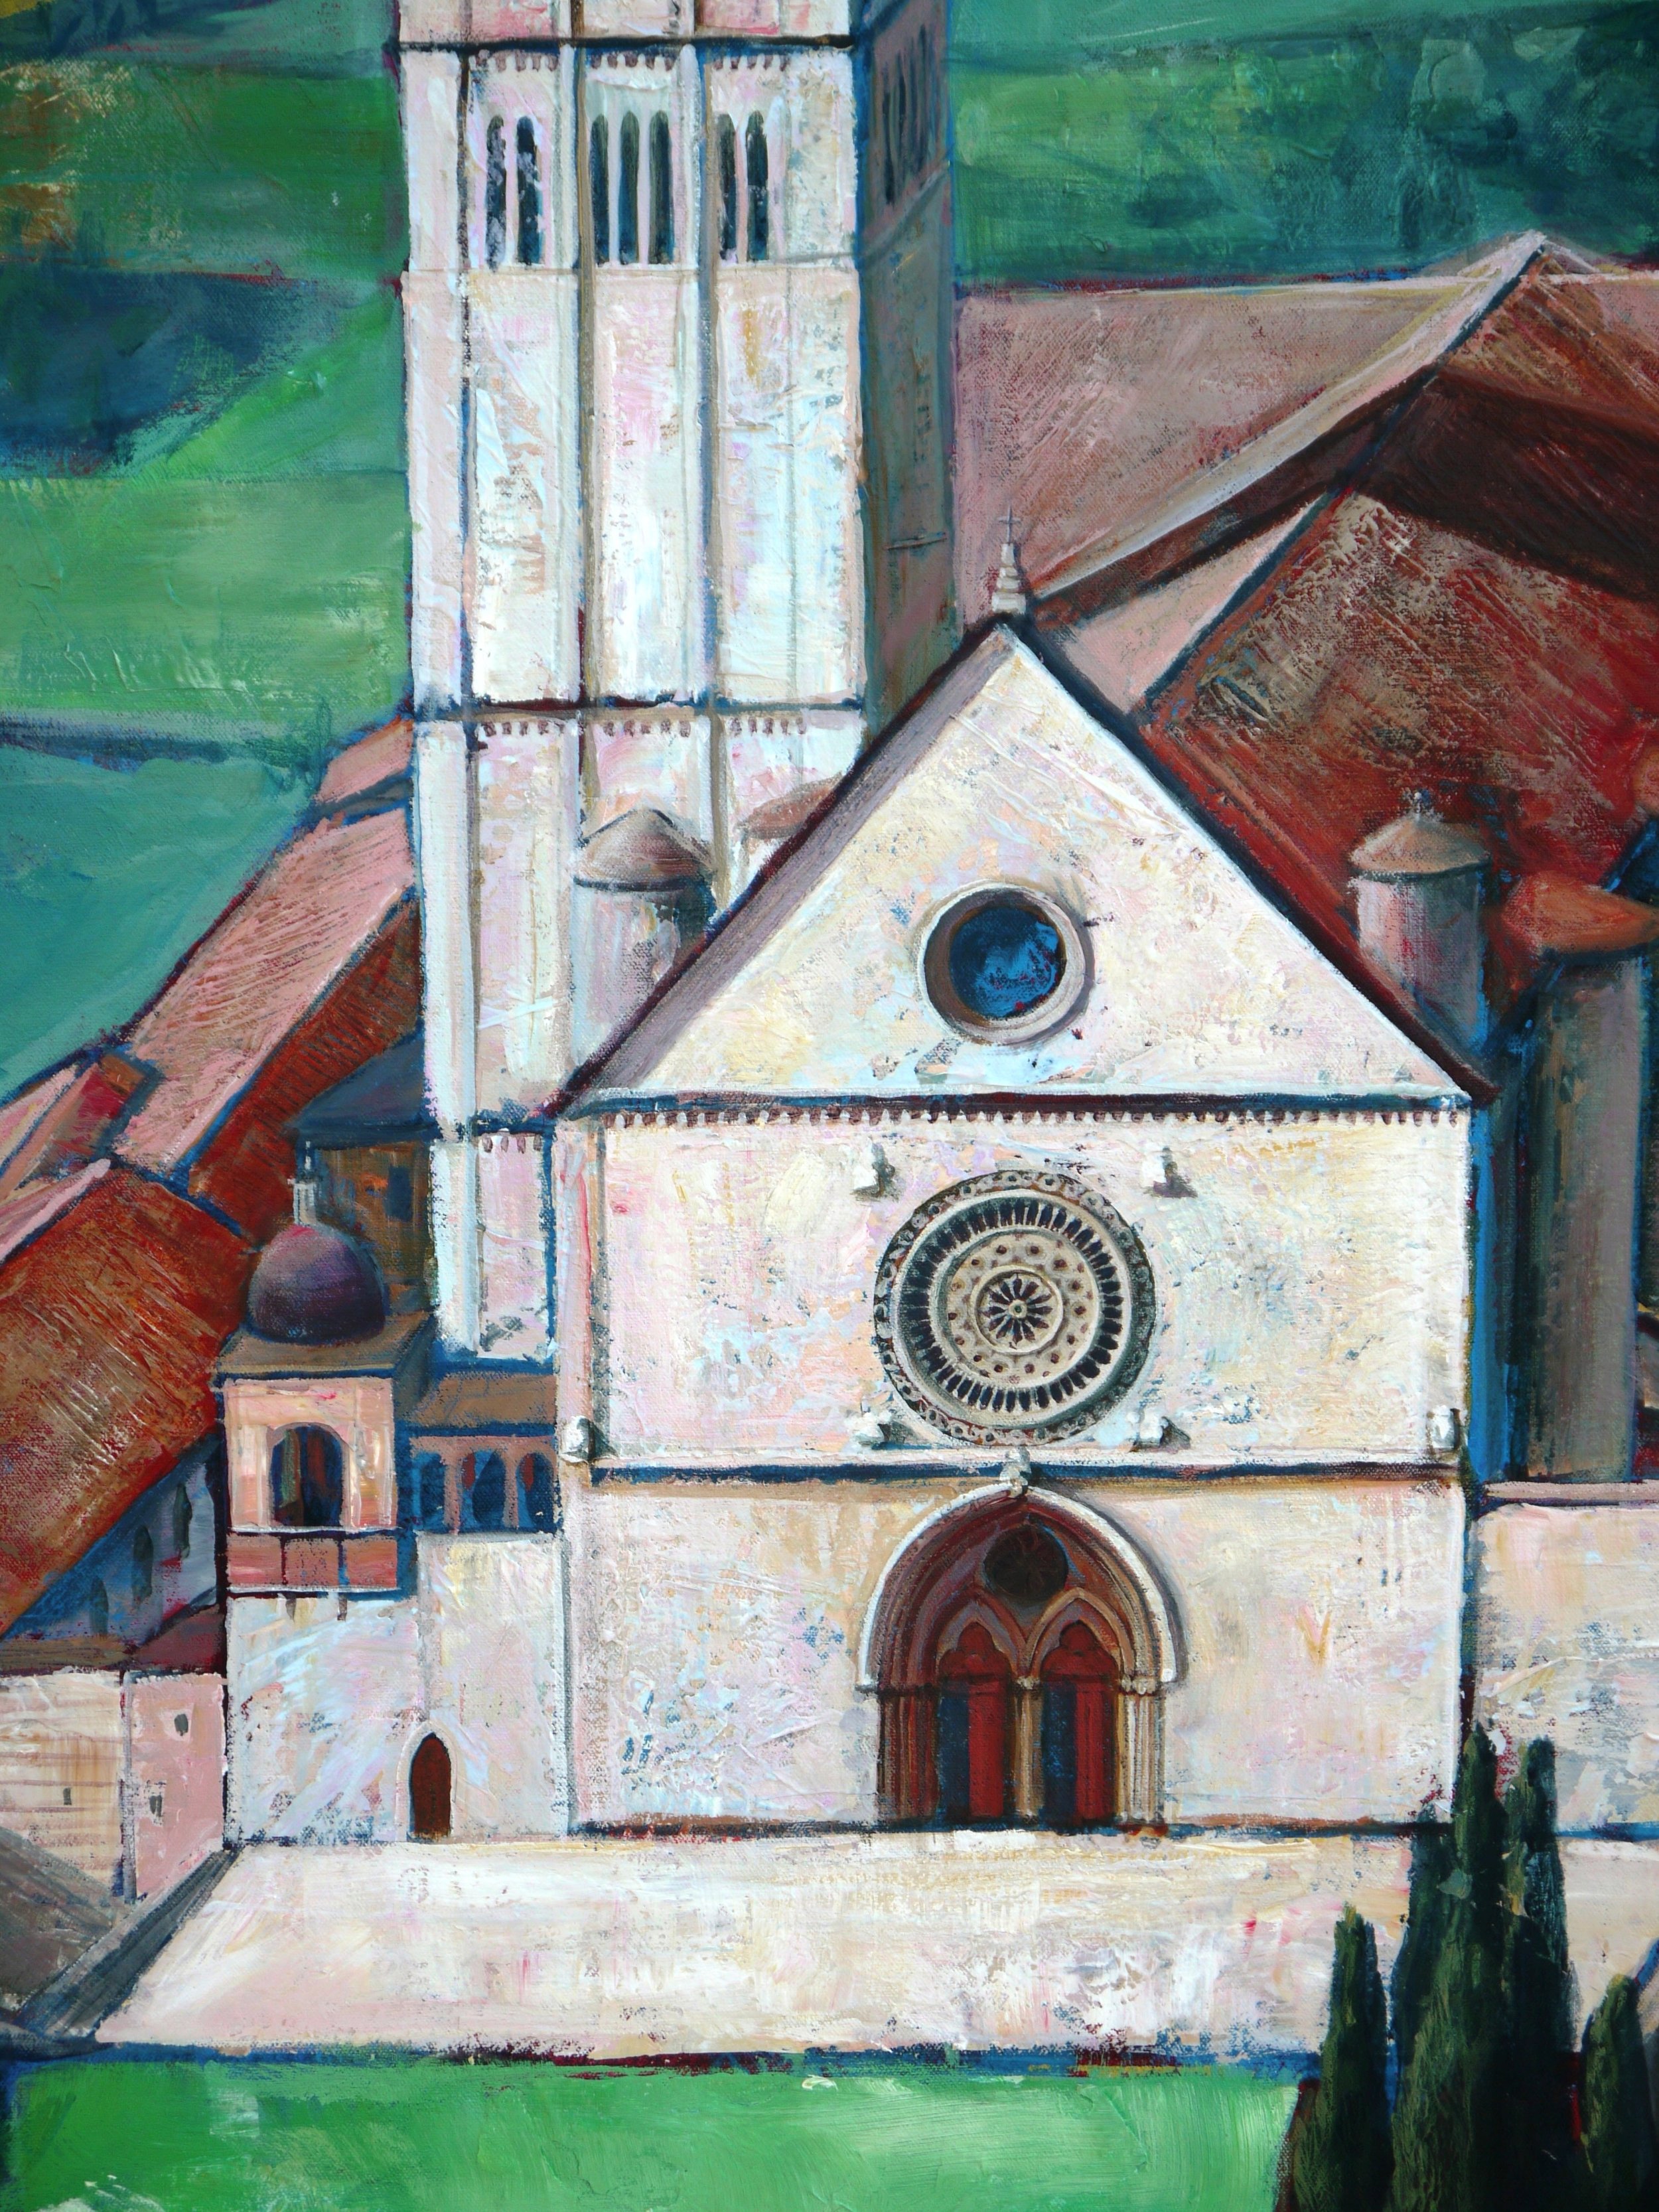 Basilica of St. Francis (detail)